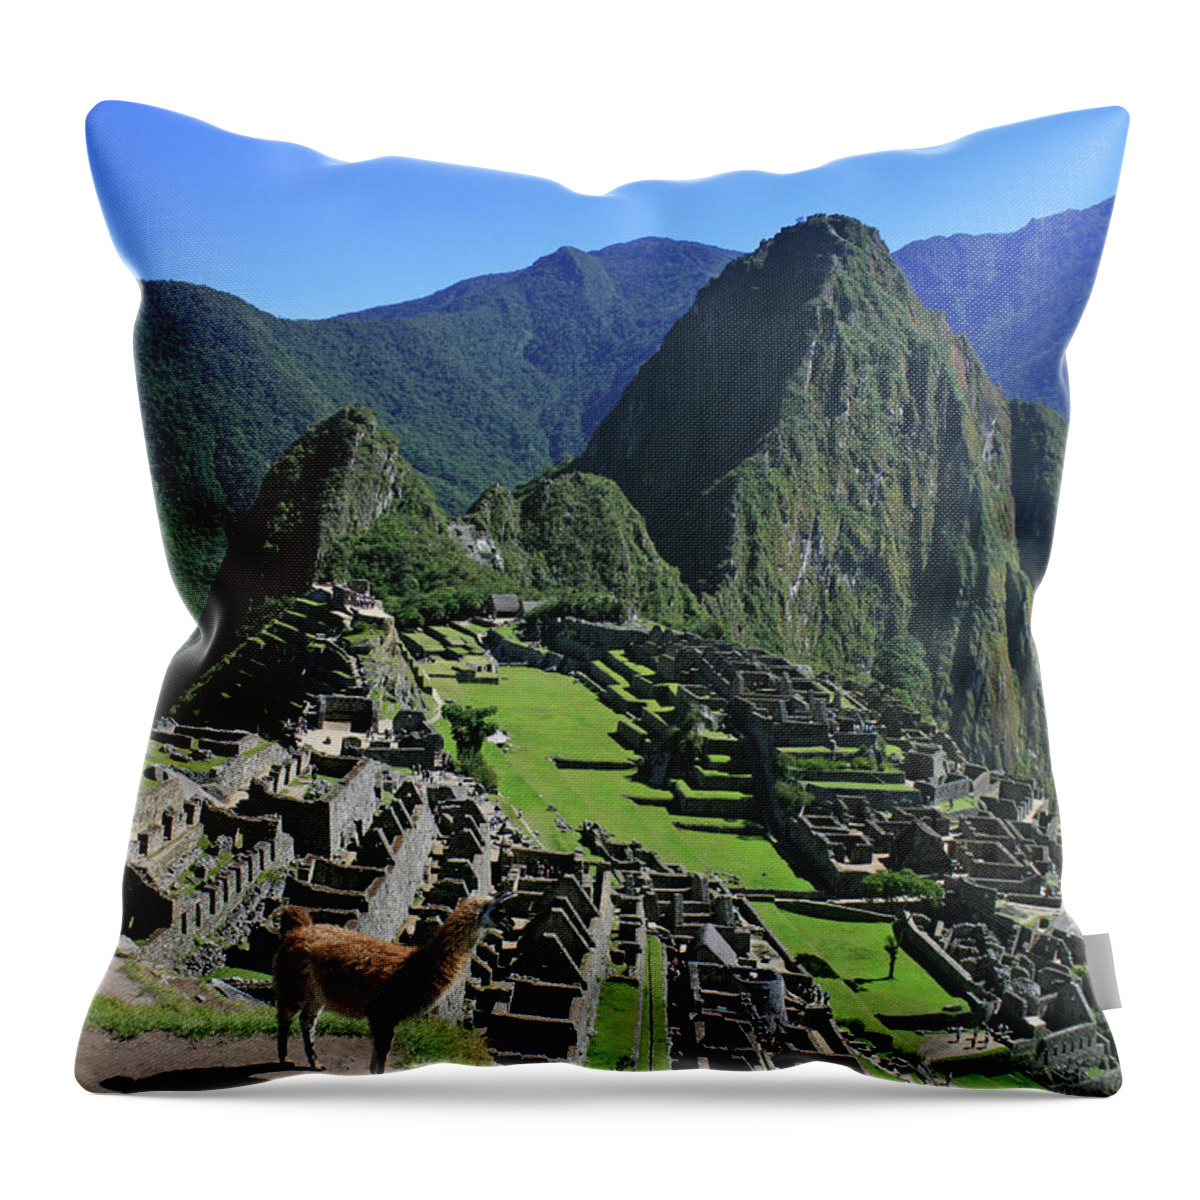 Machu Picchu Throw Pillow featuring the photograph Machu Picchu With Llama by Eric Rose Photography